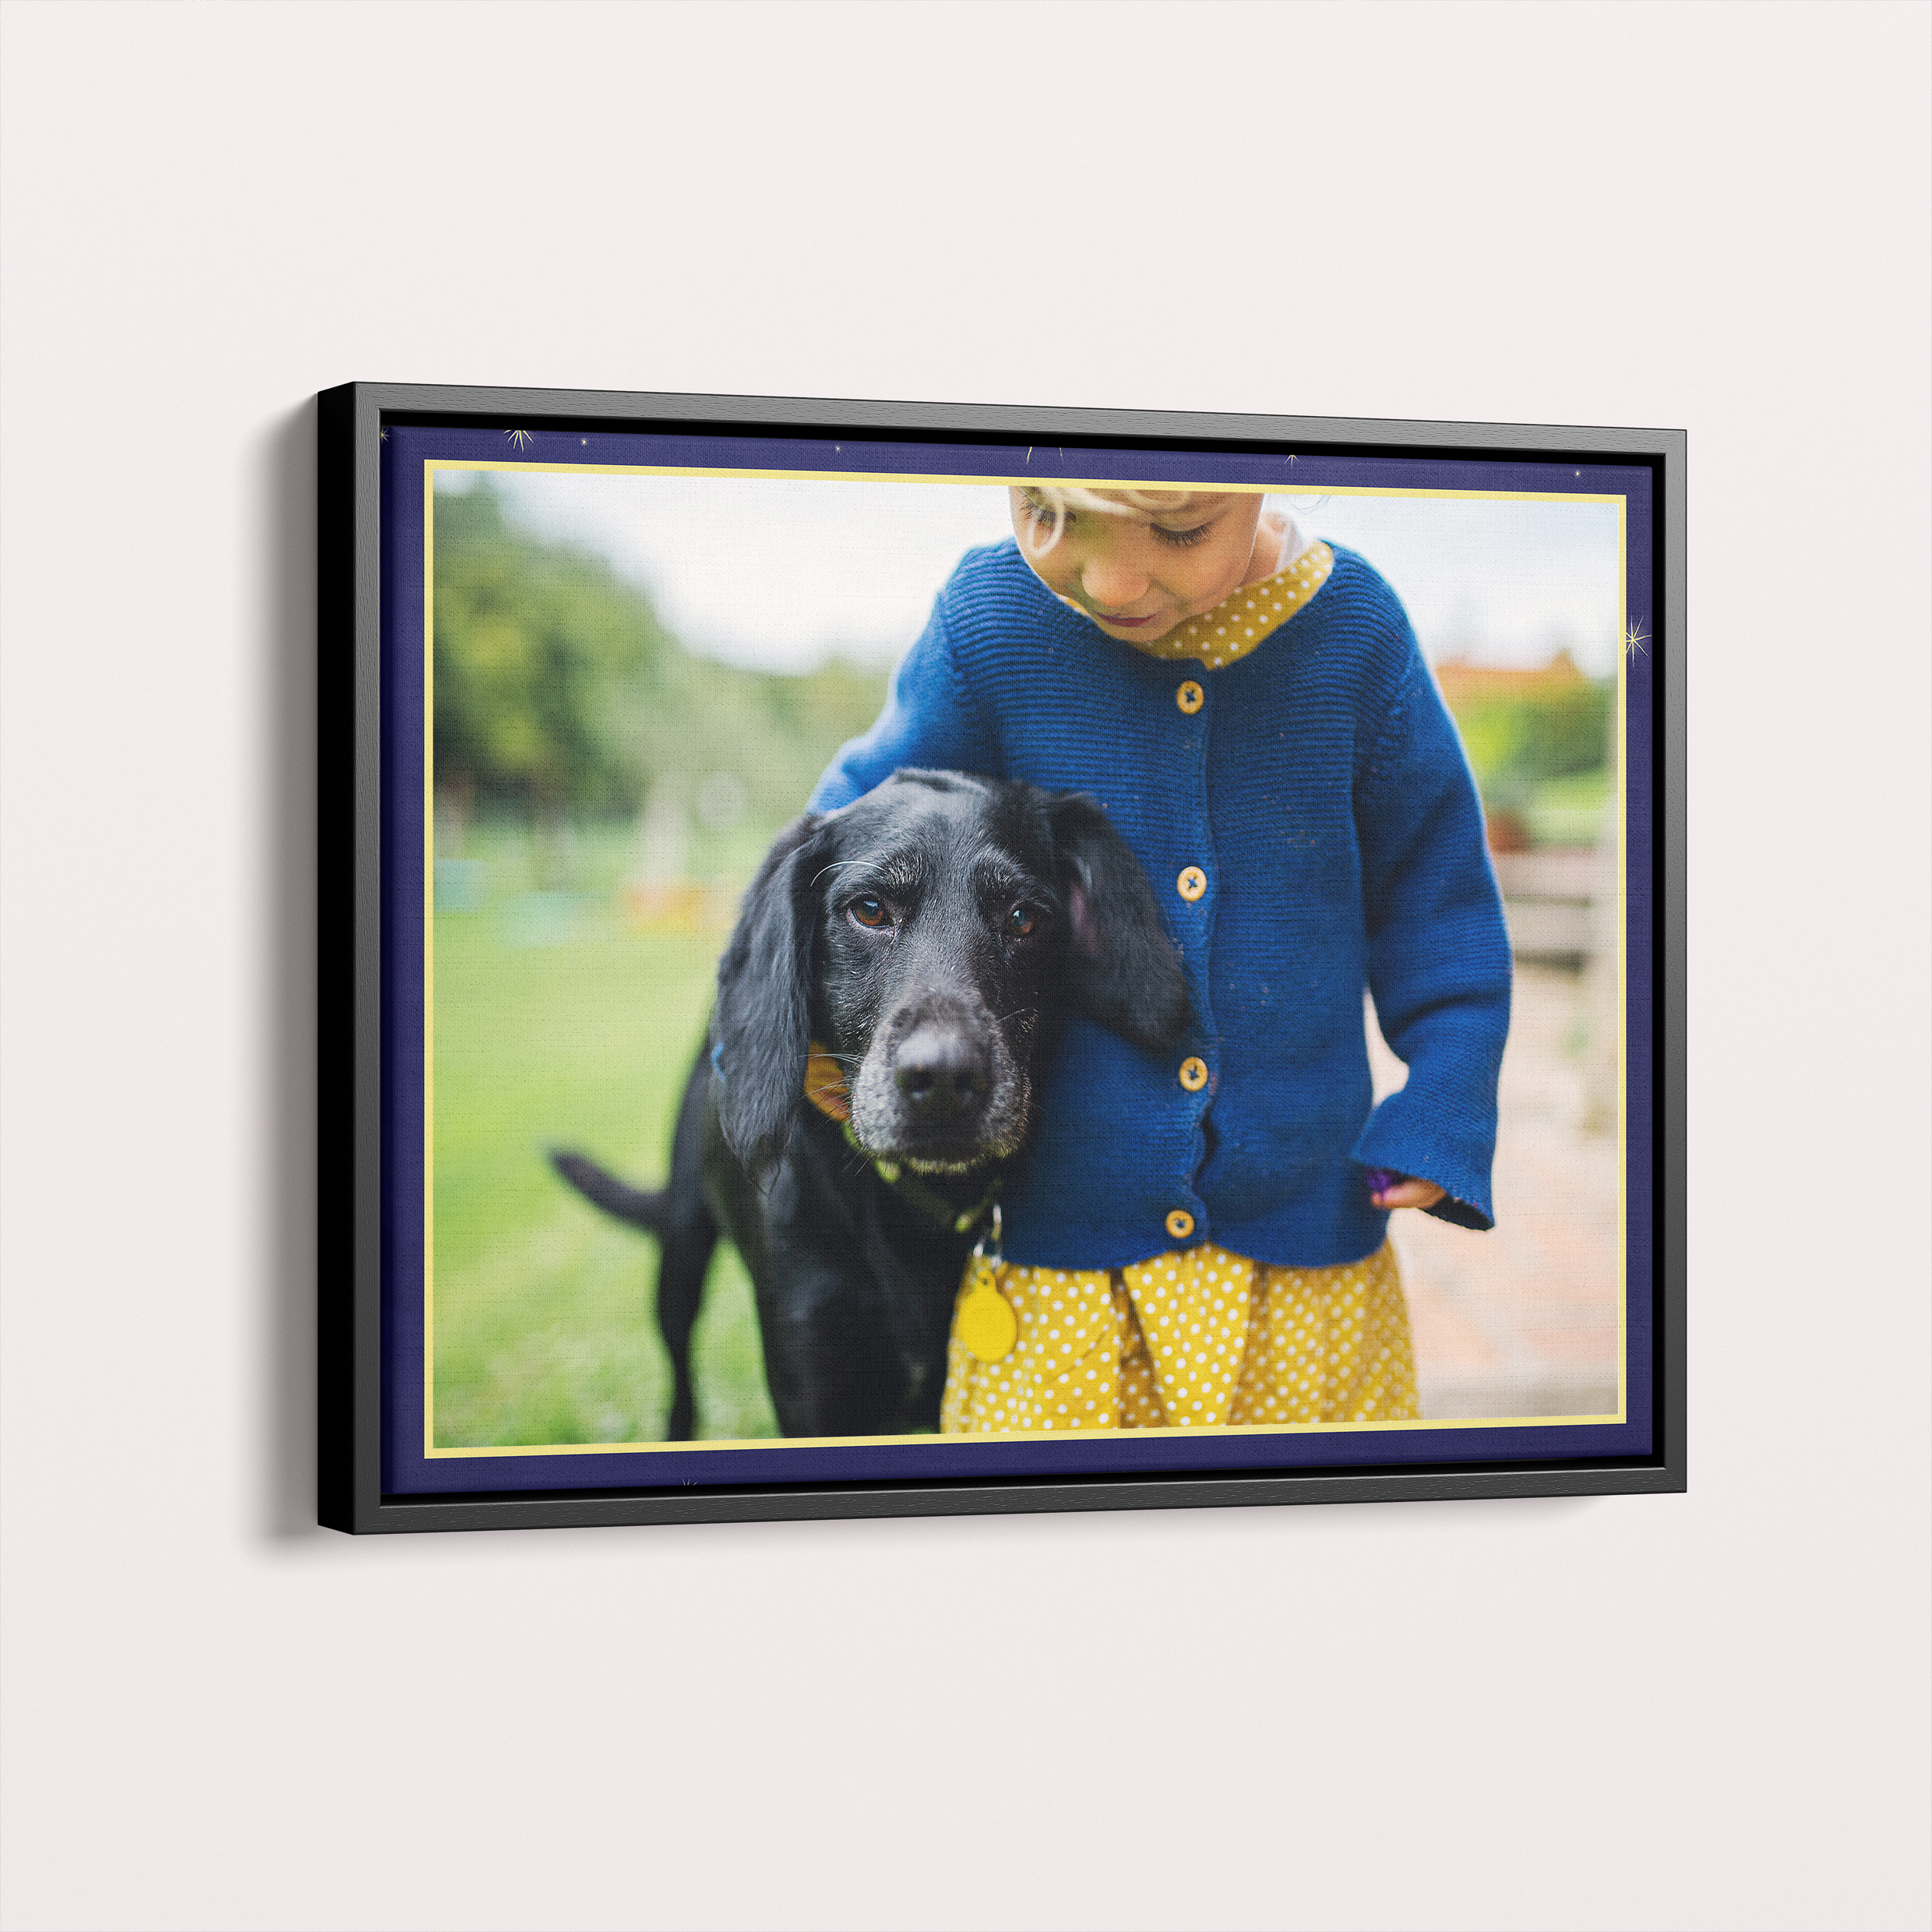  Personalized Night Wonder Framed Photo Canvas - Introduce the customizable treasure capturing your favorite memories with this landscape-oriented canvas featuring the Night Wonder design.